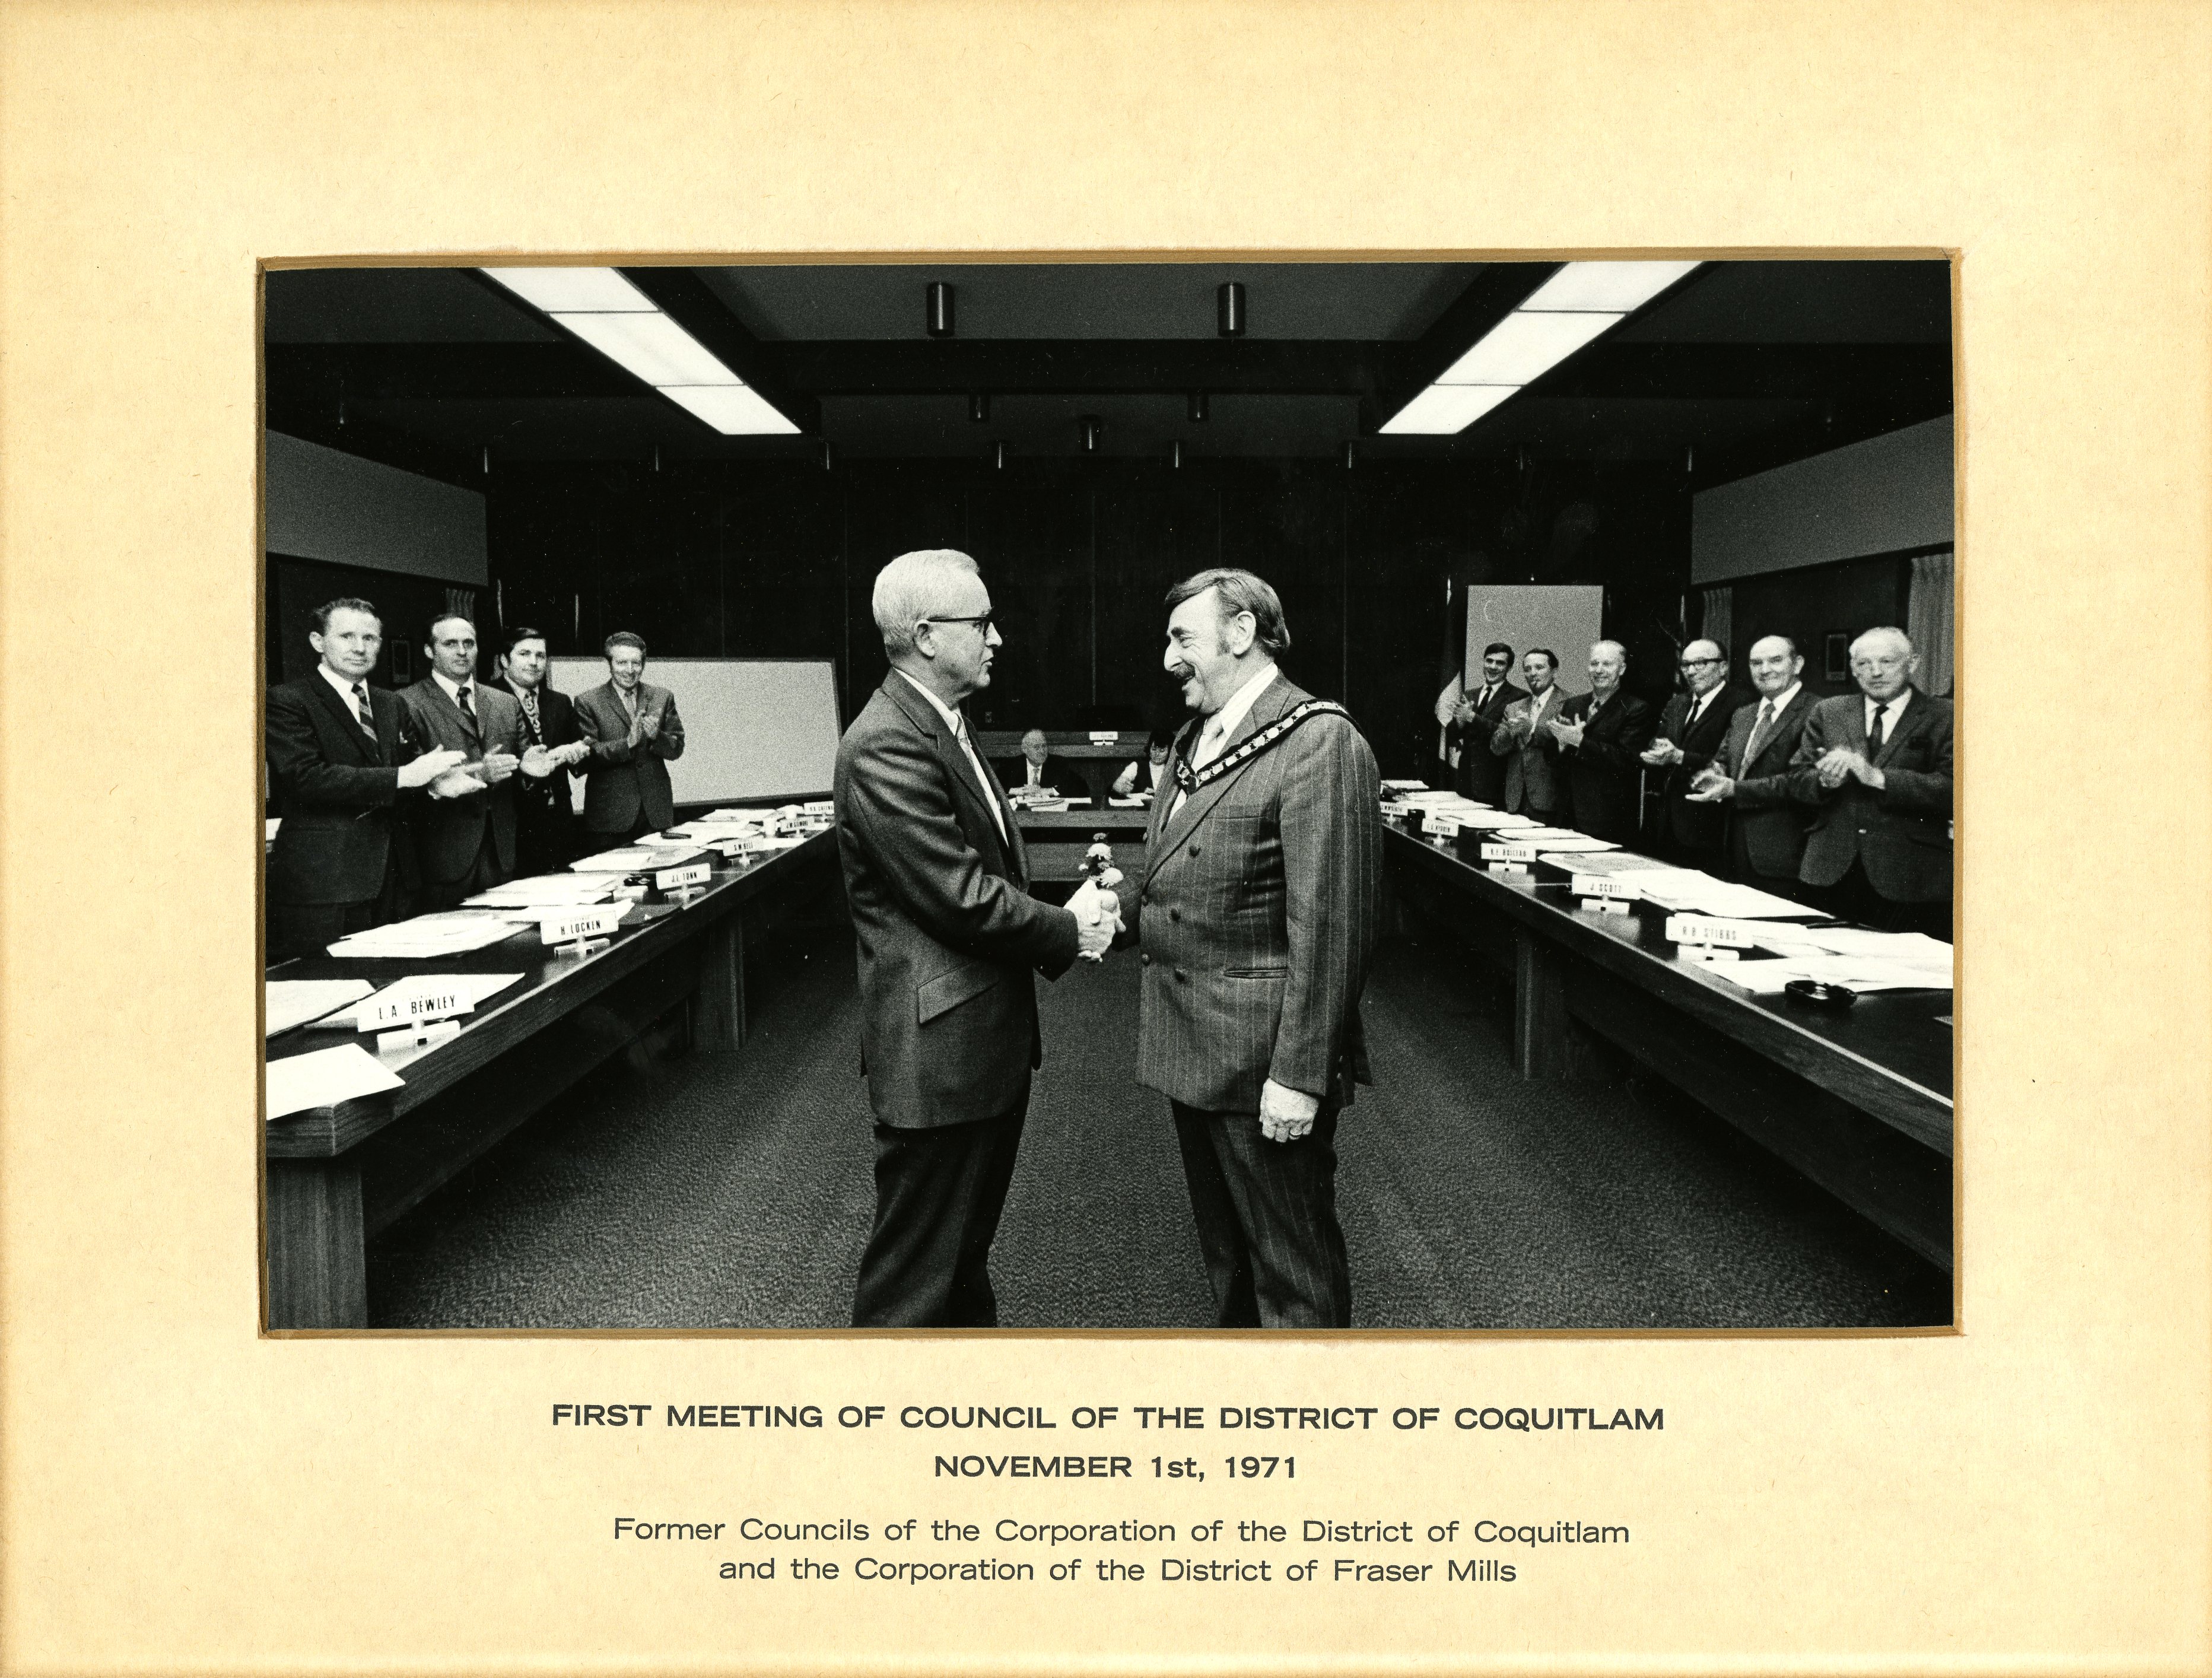 First Meeting of Council of the District of Coquitlam, November 1, 1971 (JPG) Opens in new window